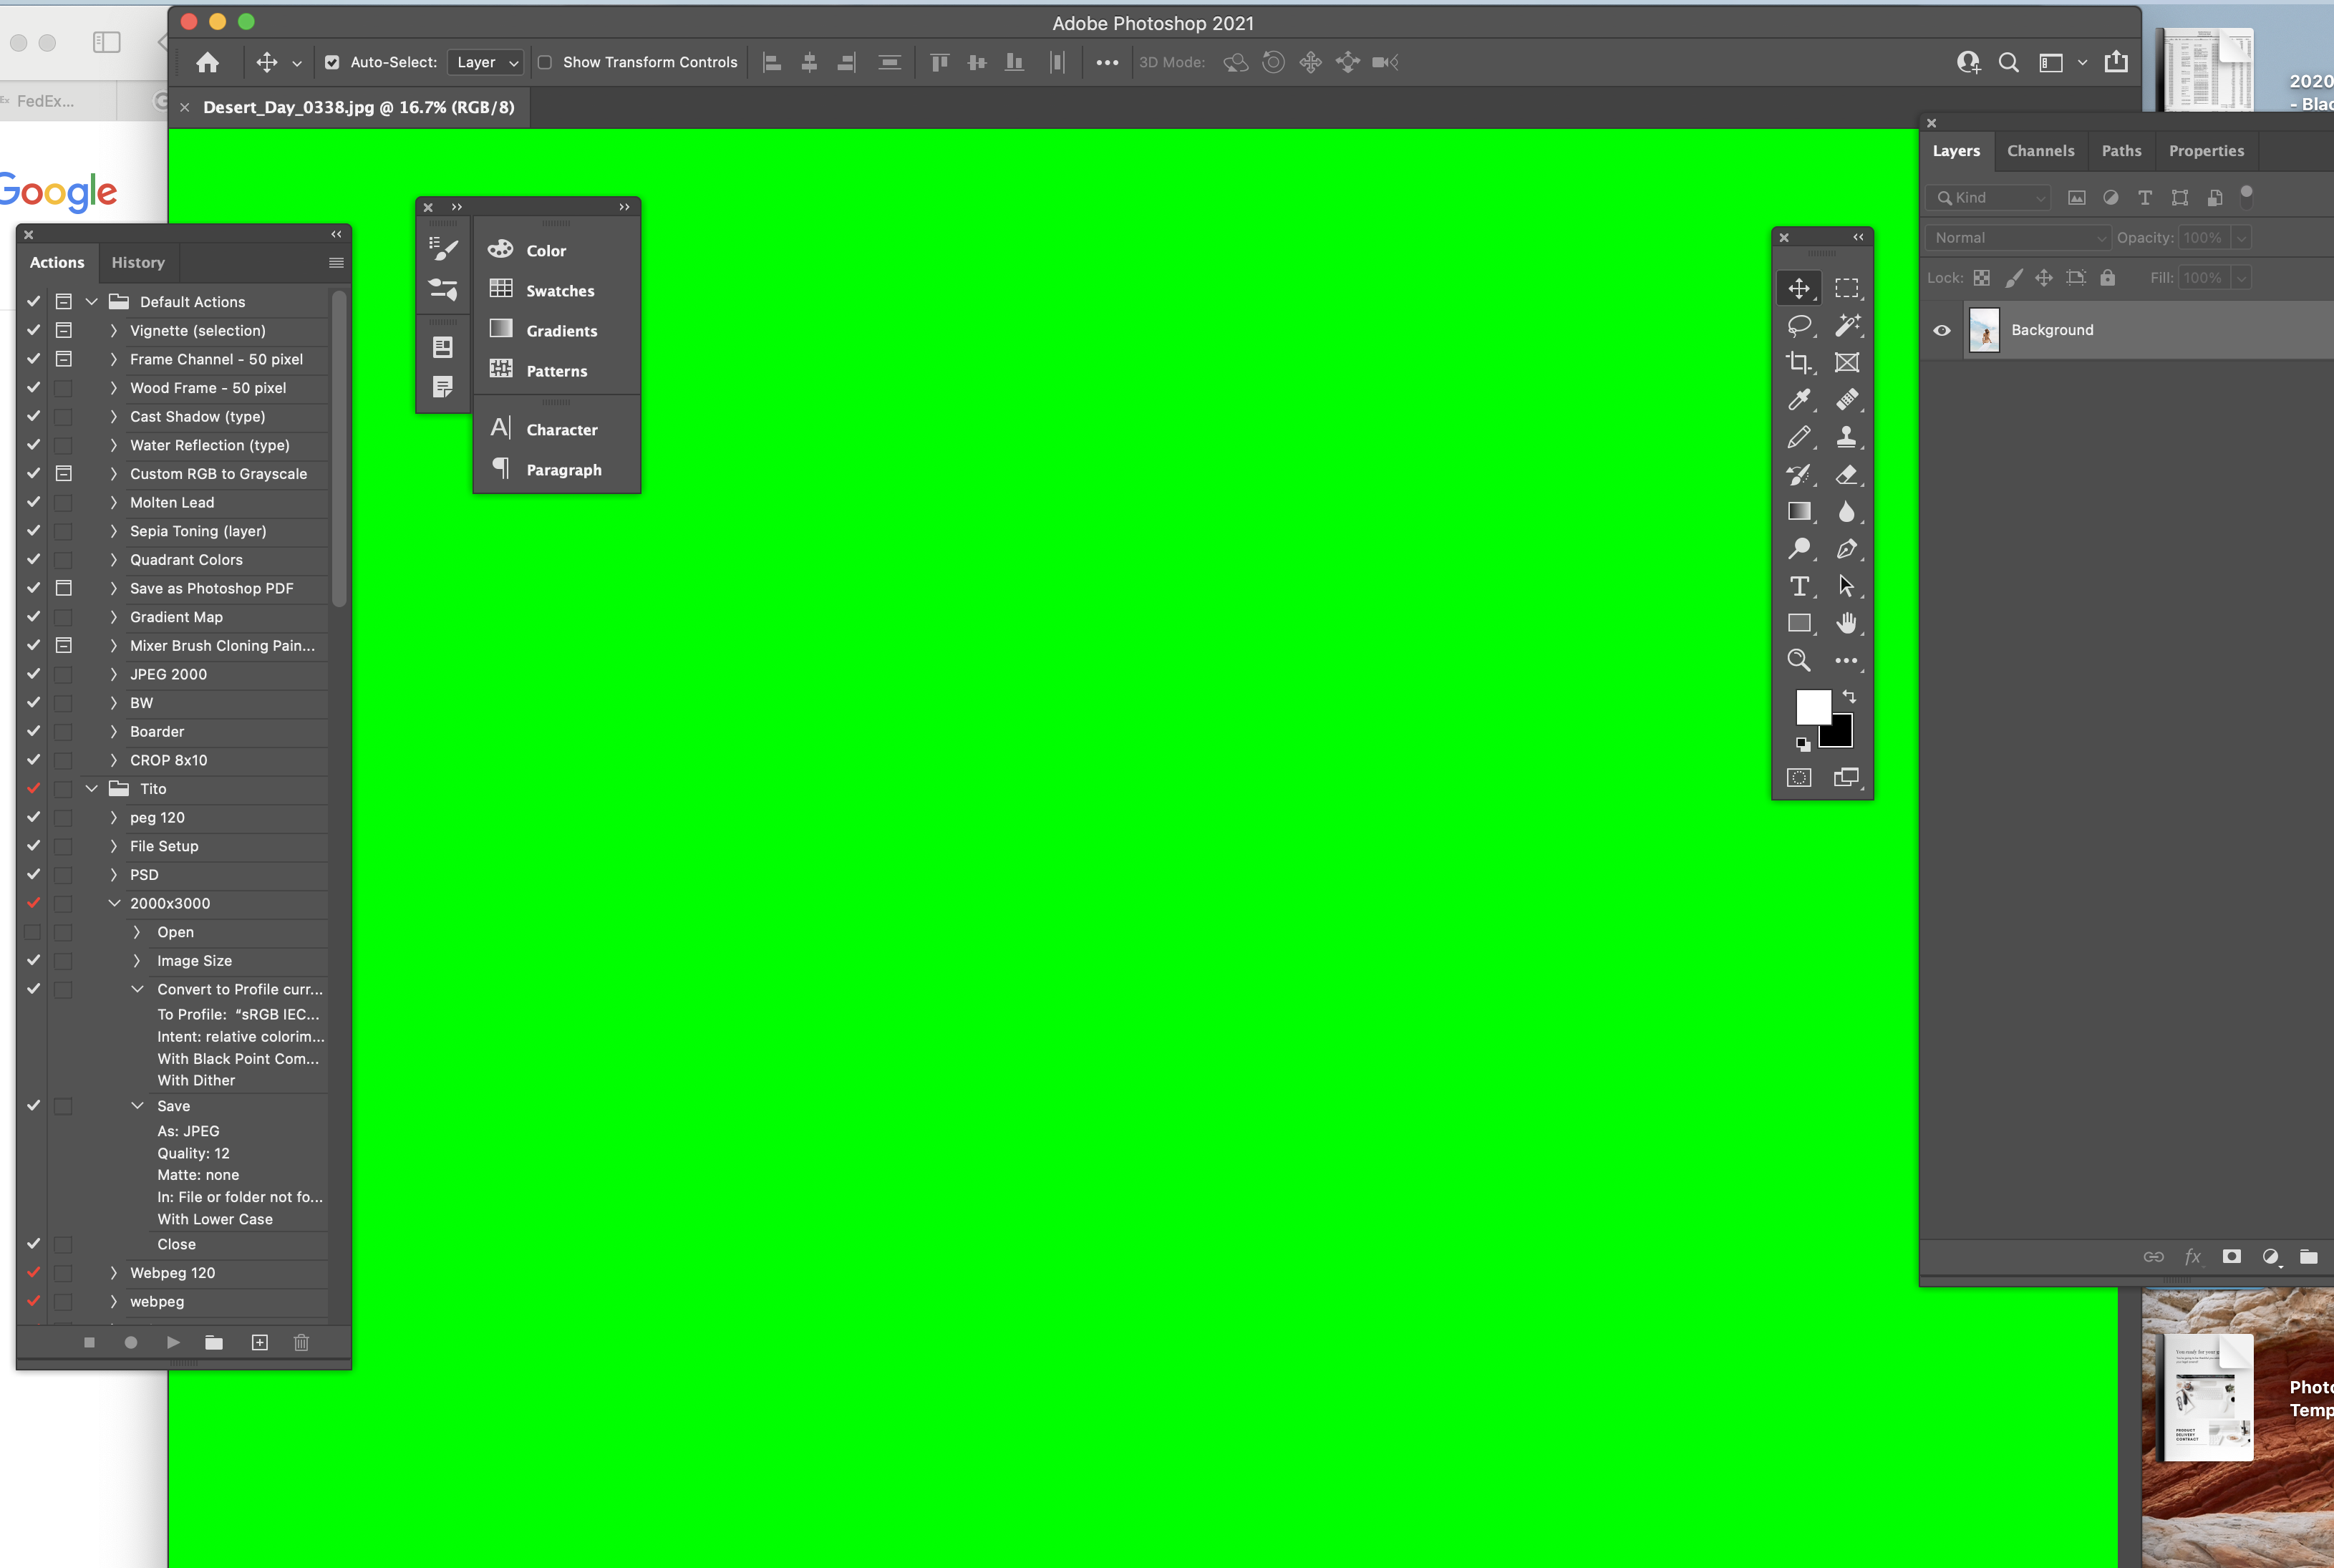 Solved: Entire Photoshop screen turns neon green - Adobe Support Community  - 12155329